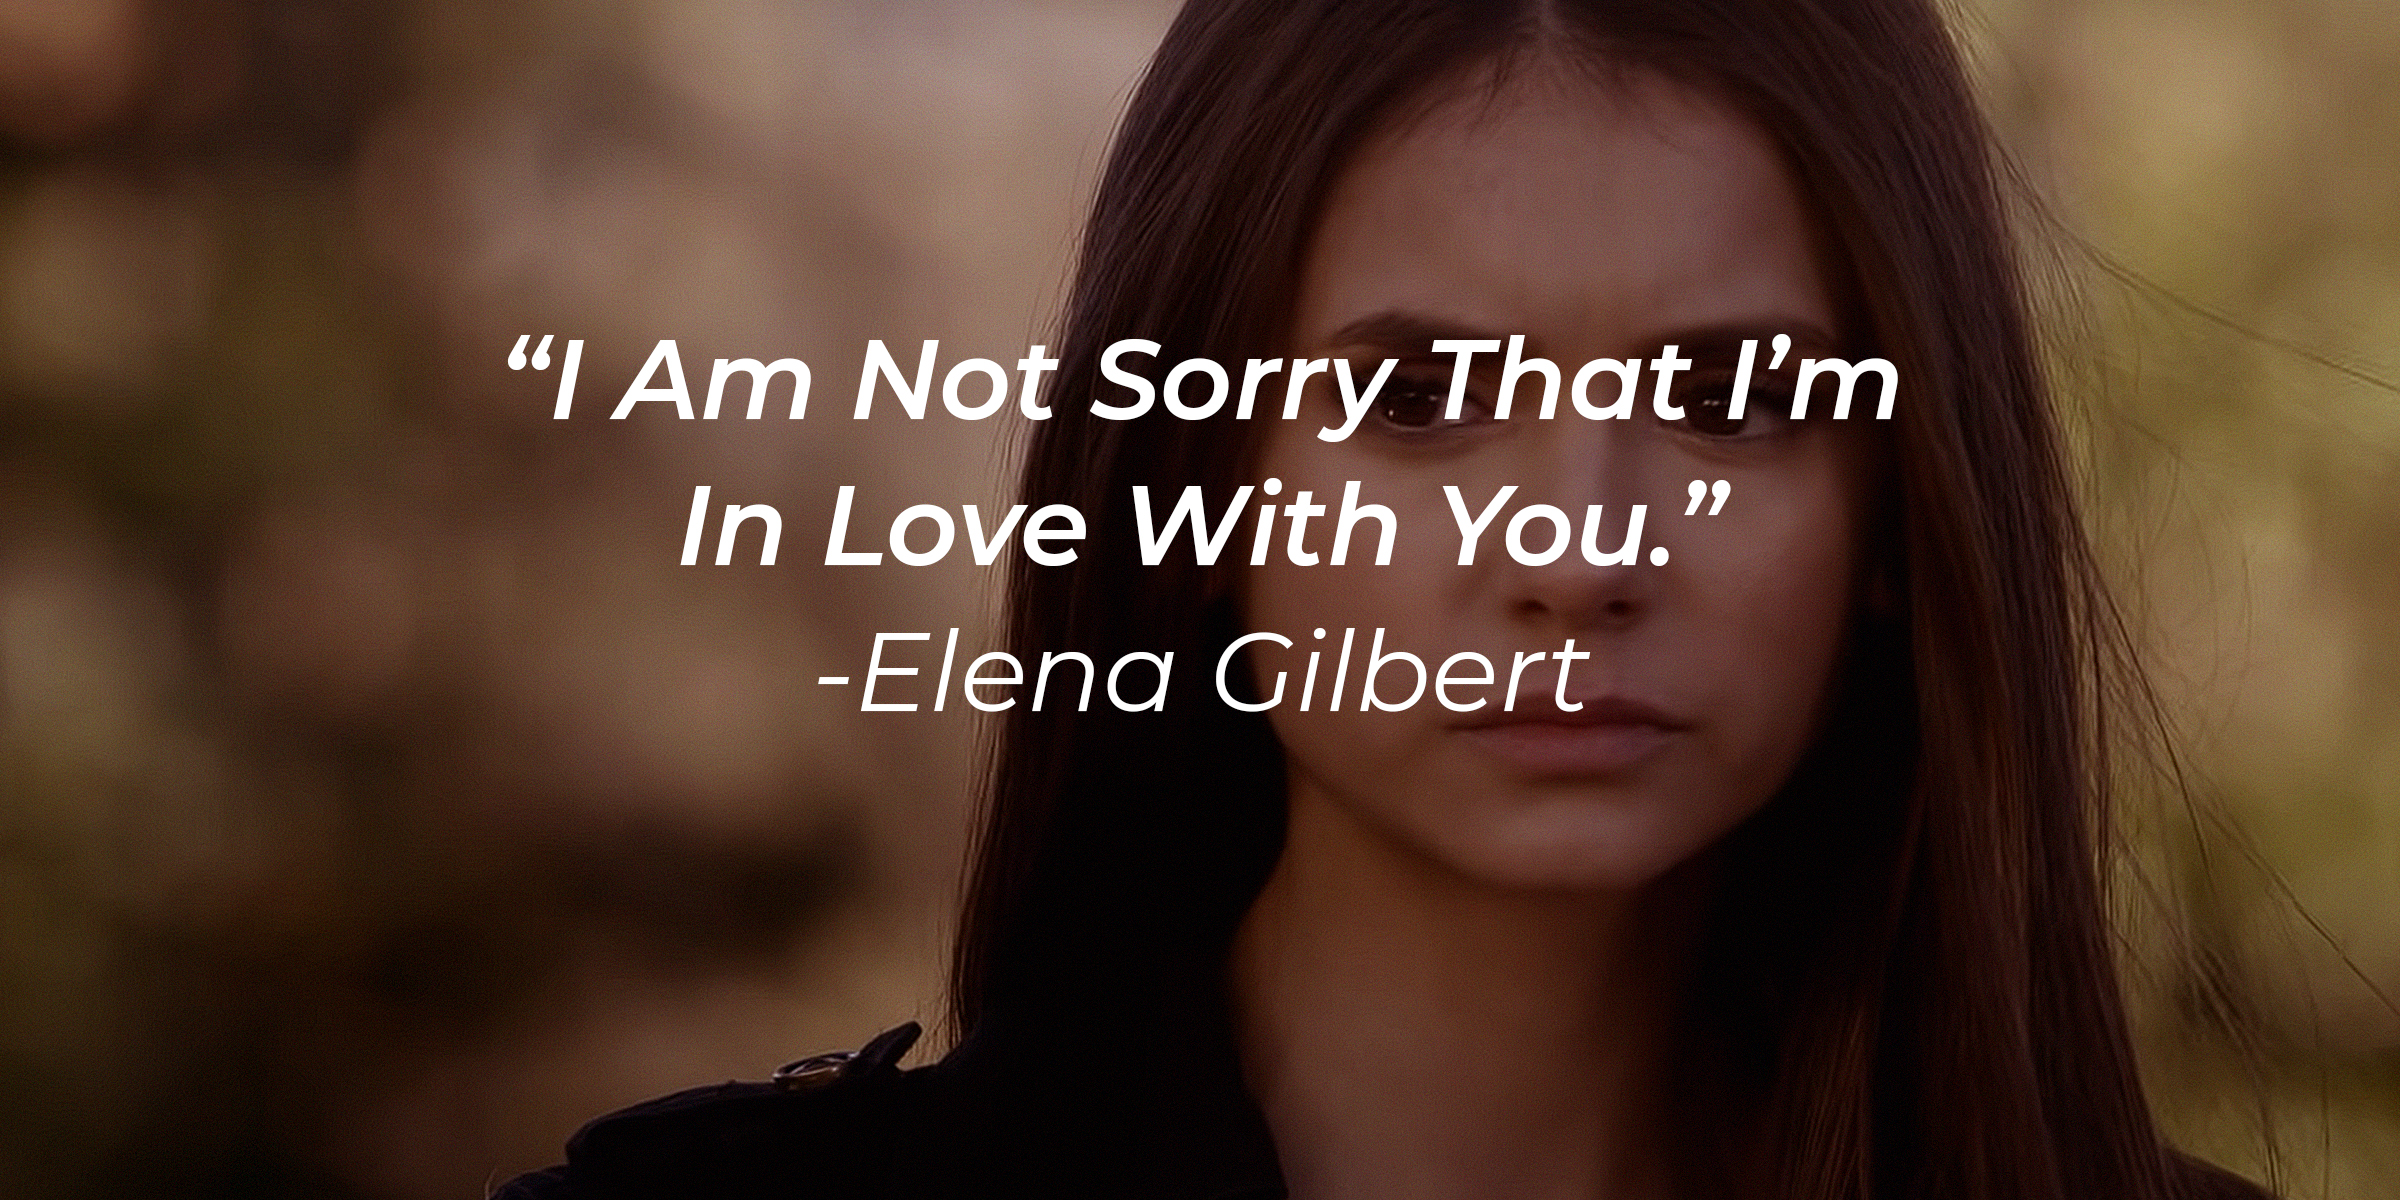 Elena Gilbert with her quote: "I Am Not Sorry That I'm In Love With You" | Source: youtube.com/stillwatchingnetflix